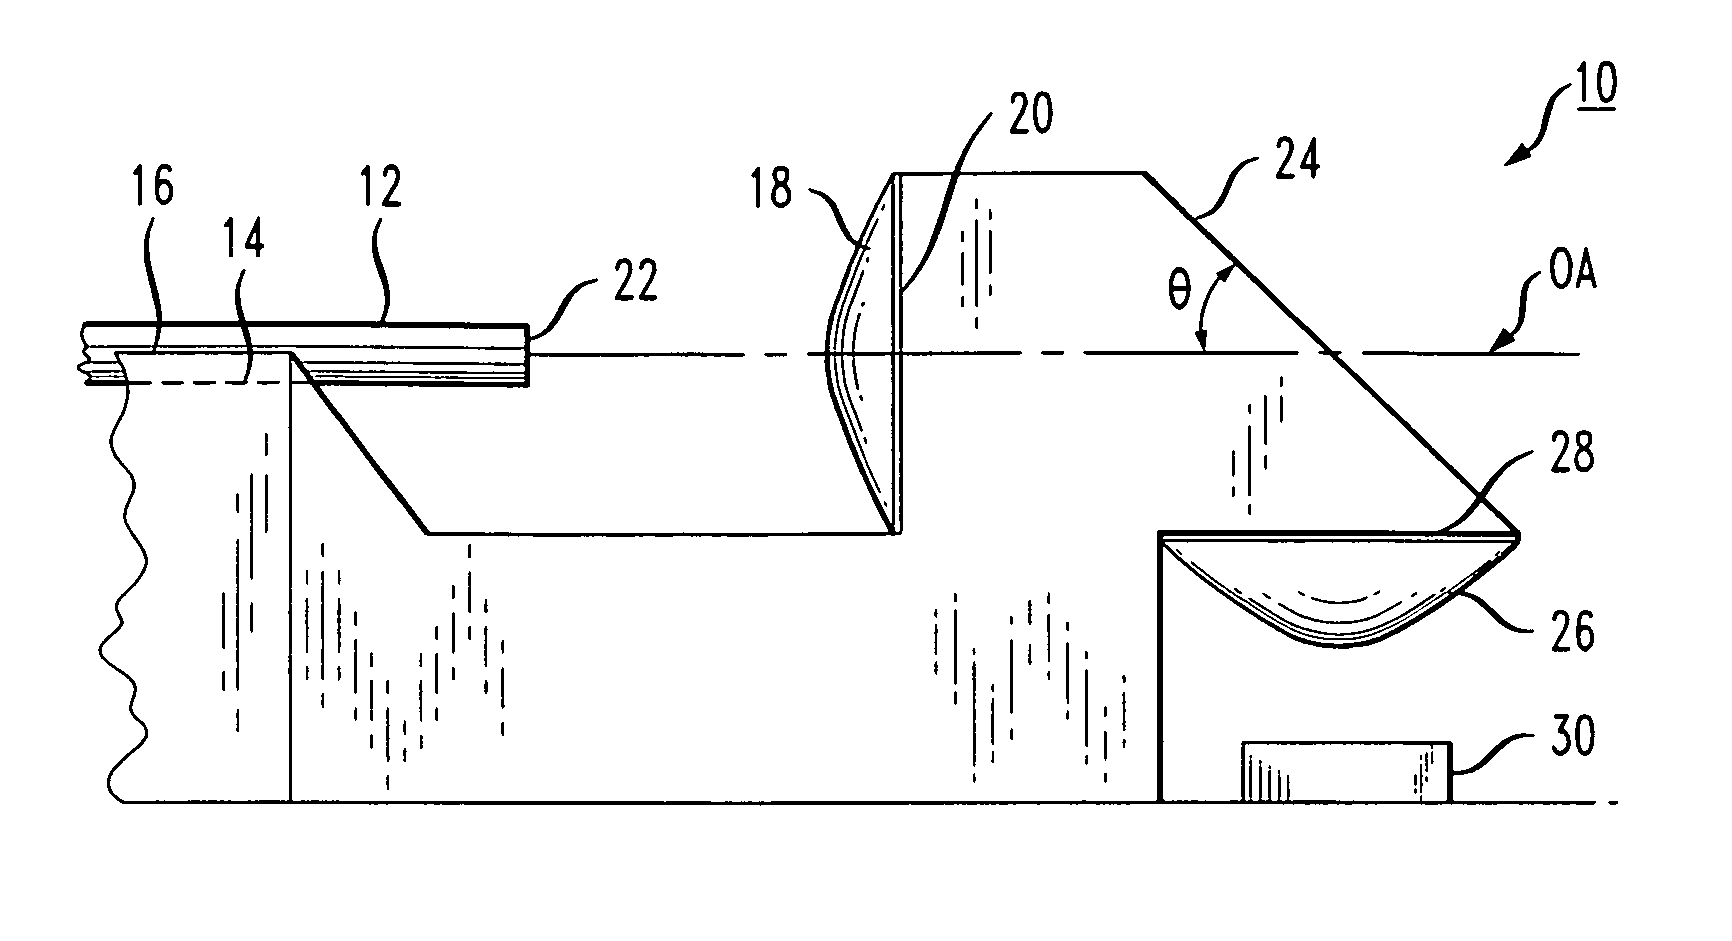 Dual-lensed unitary optical receiver assembly